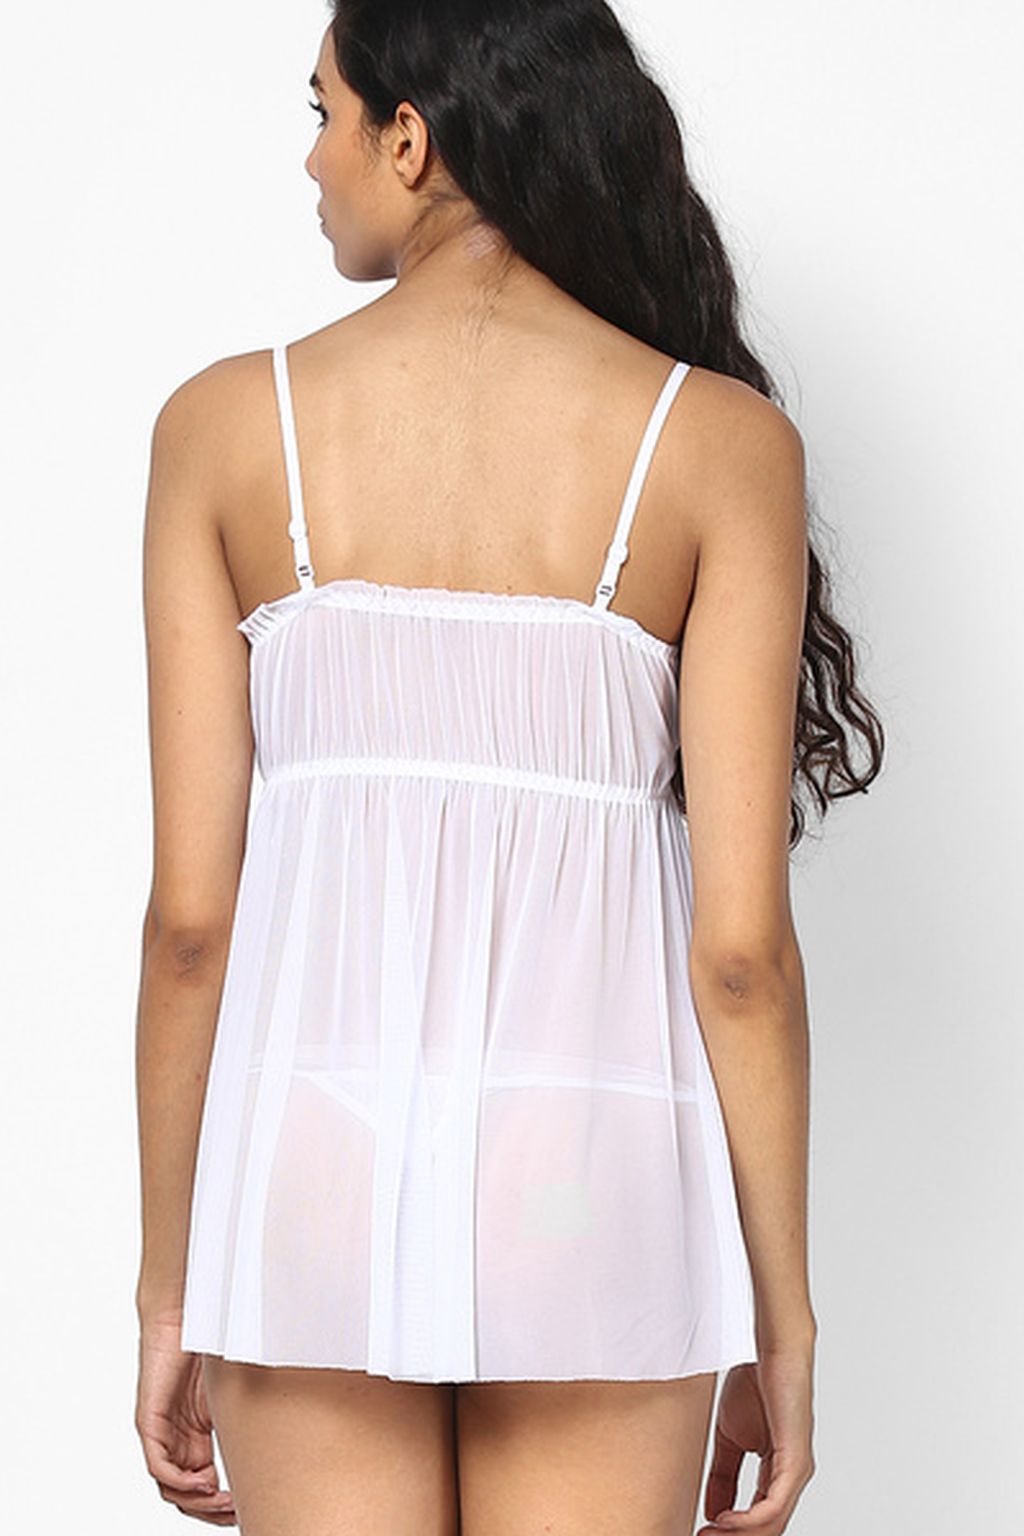 Silk Romantic Sleepwear: Sexy Short Sleeve Nightgowns For Summer Pajamas  And Fashionable Ladies Style 2896 From Ai791, $8.63 | DHgate.Com